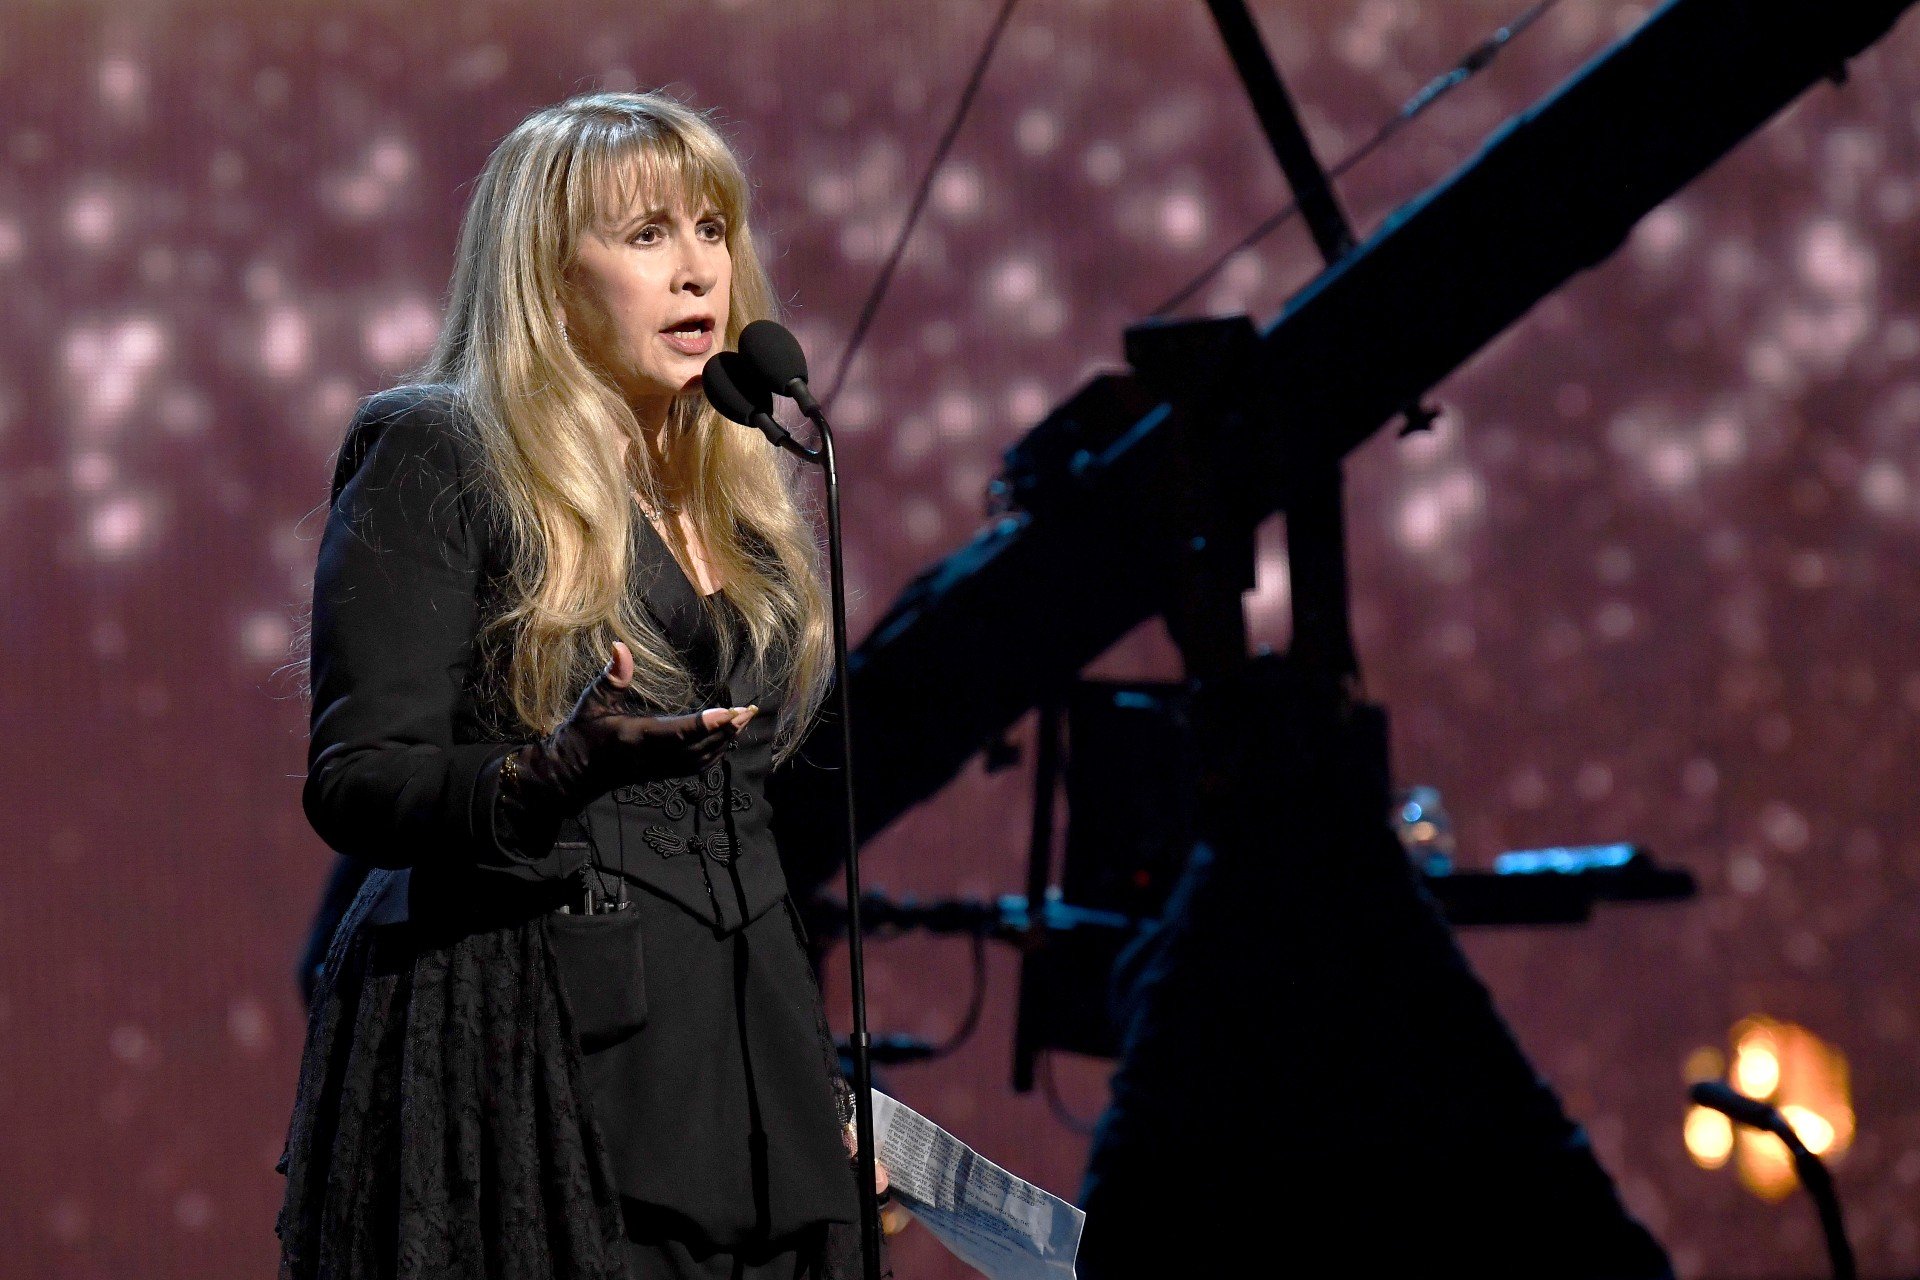 Stevie Nicks wears a long, black outfit while speaking into a microphone during a concert.